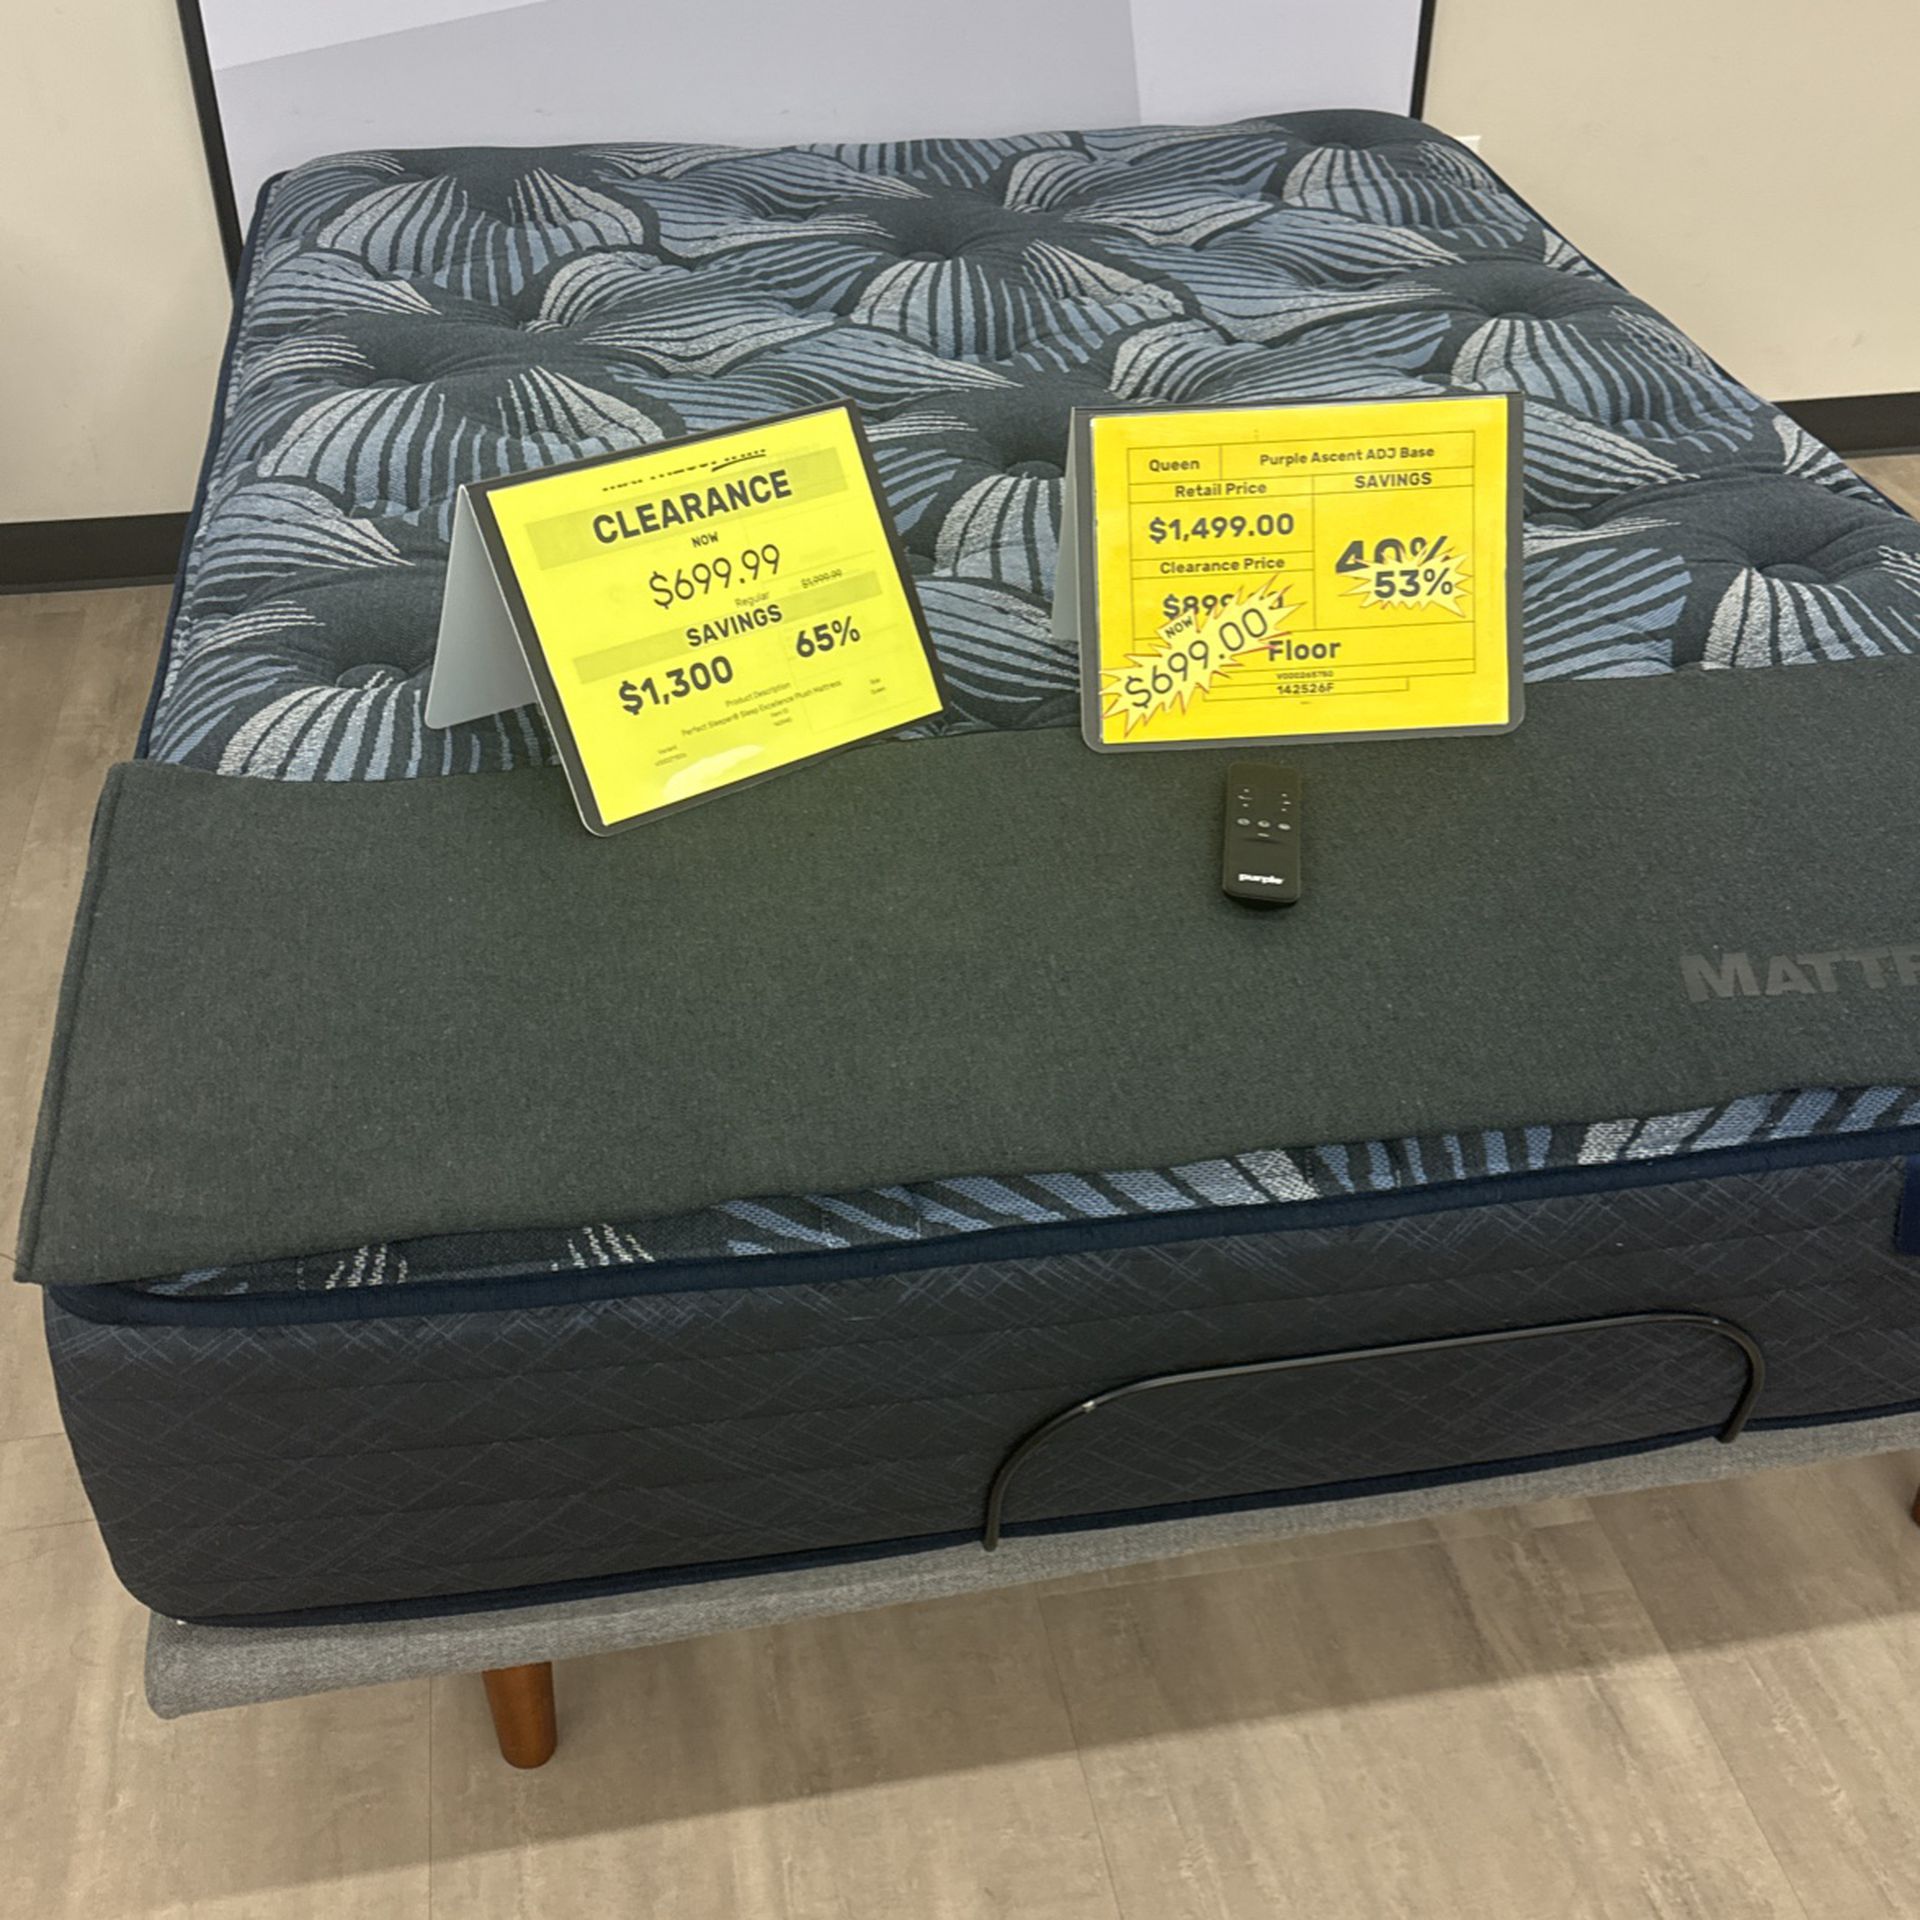 Outlet mattress for sale